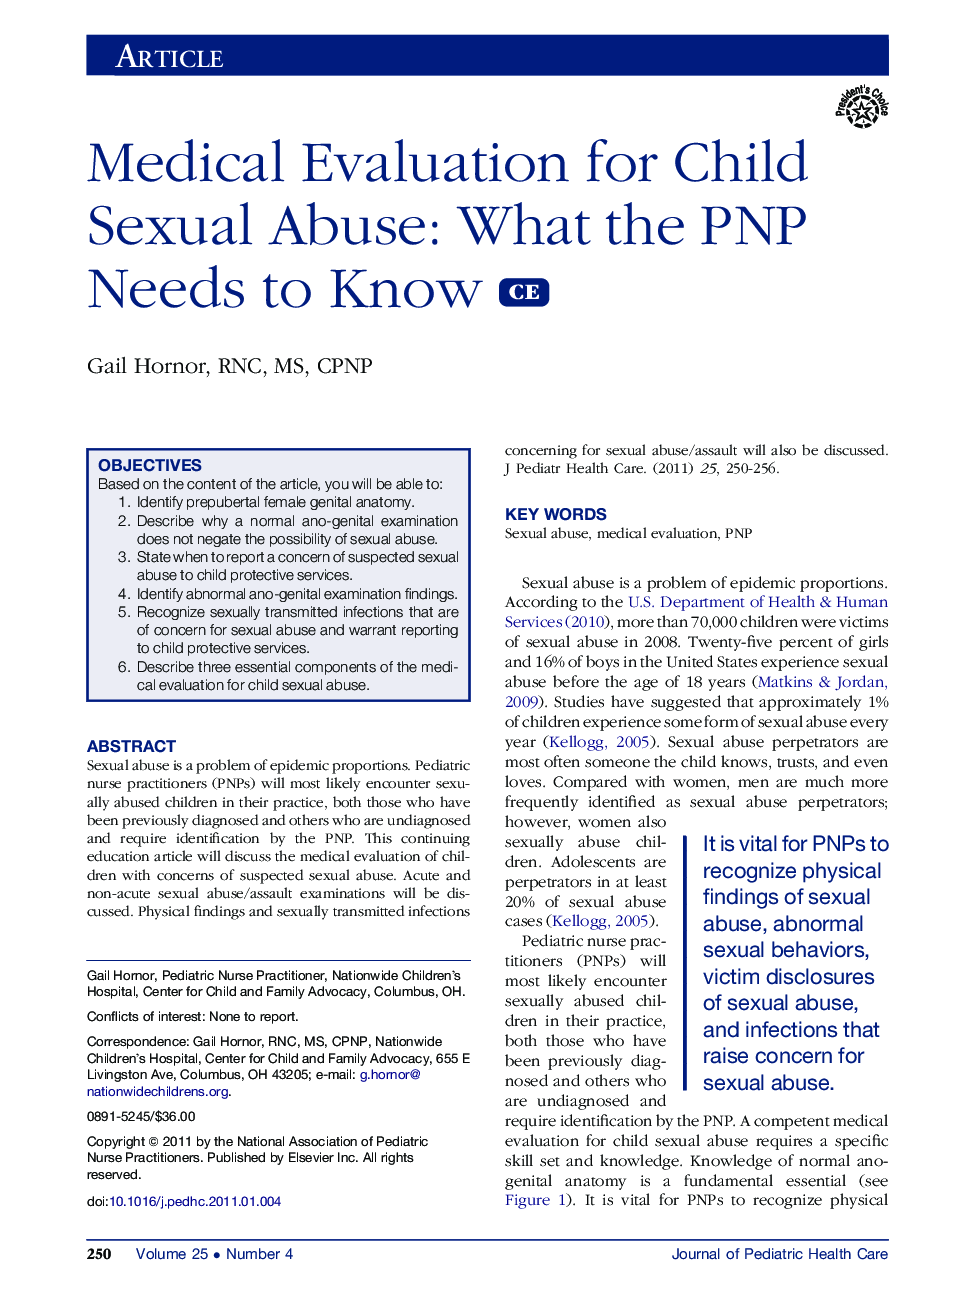 Medical Evaluation for Child Sexual Abuse: What the PNP Needs to Know 